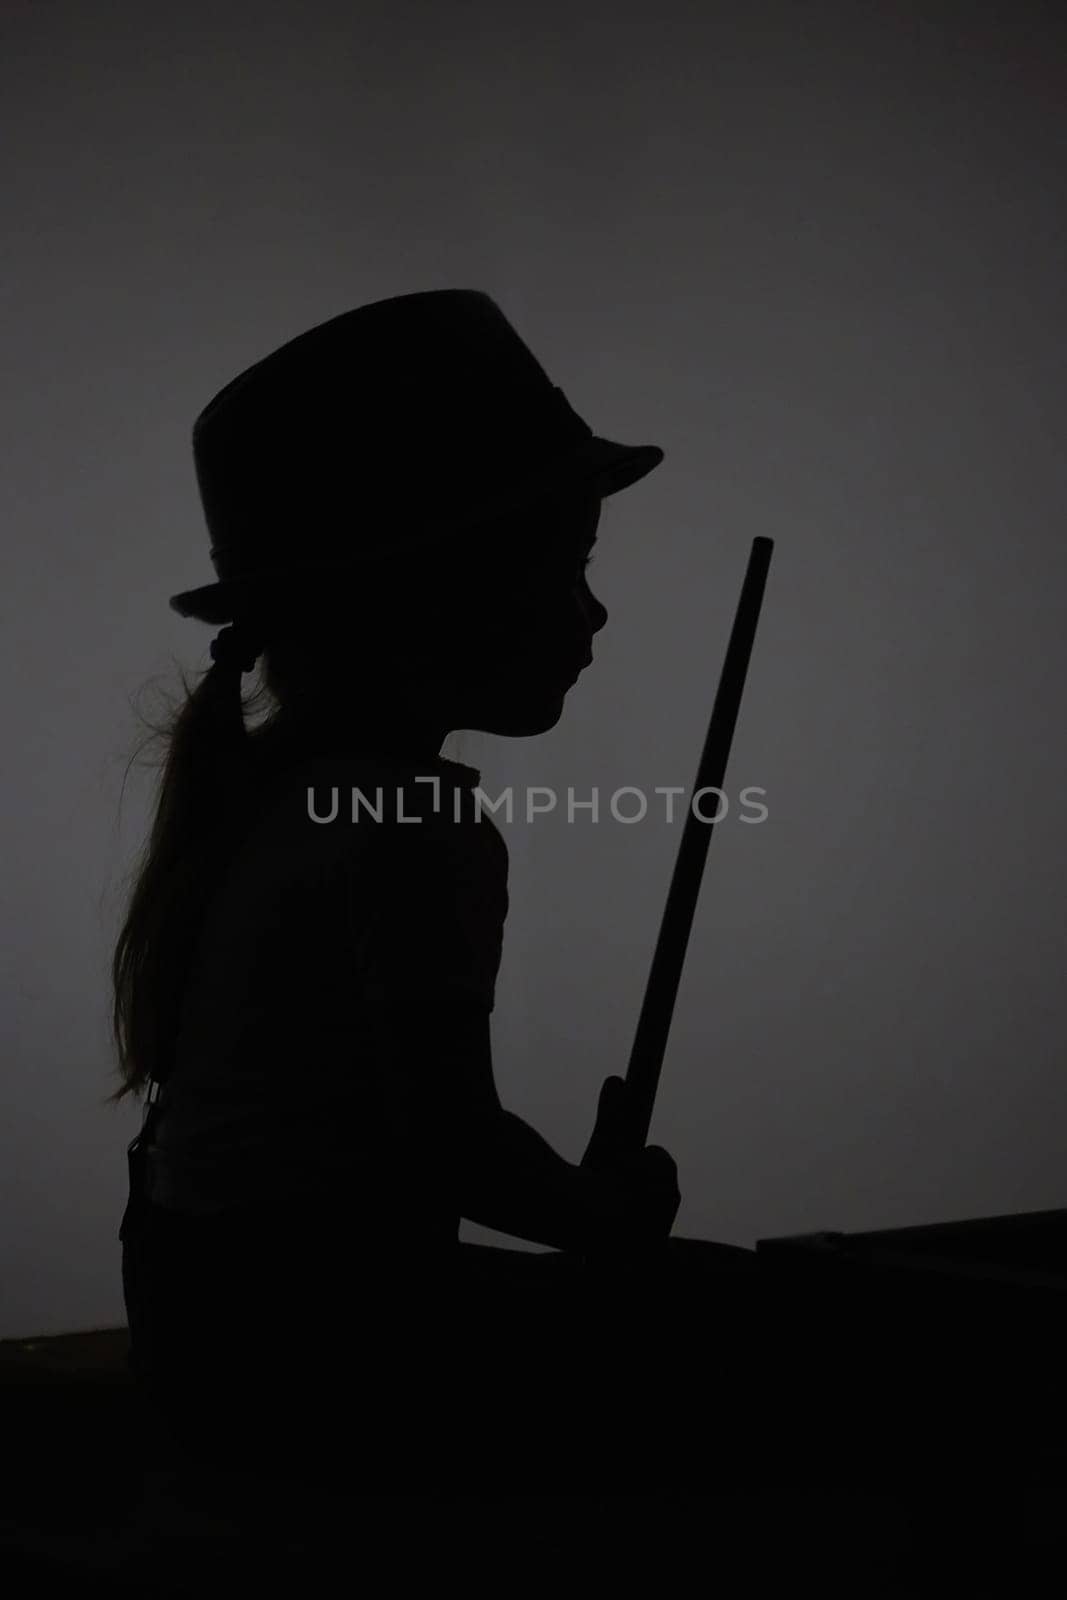 Silhouette of a child playing toy billiards.